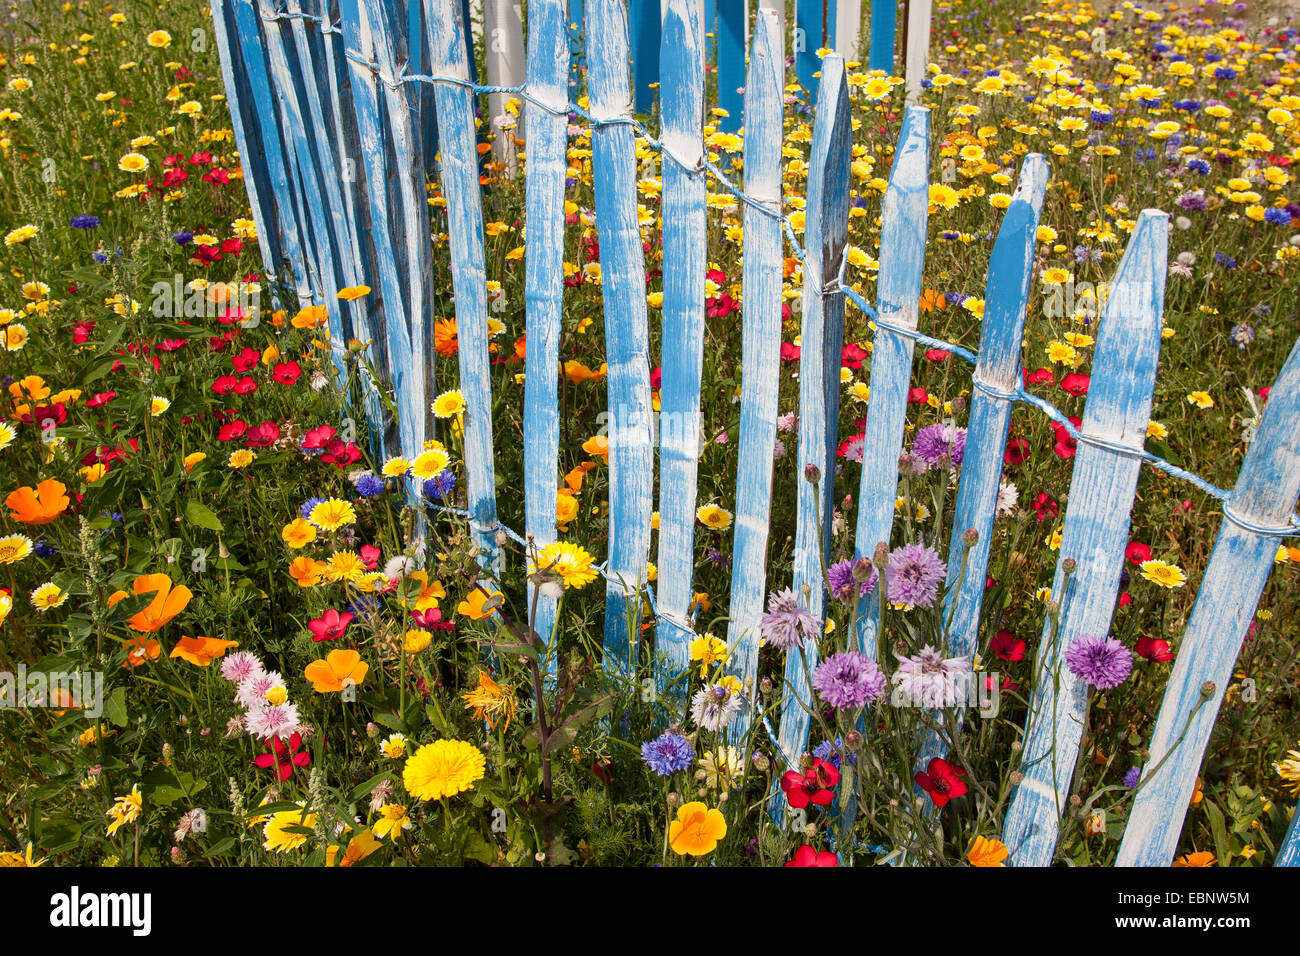 colourful flower meadow with scarlet flax, garden-pot marigold and blue picket fence, Germany Stock Photo